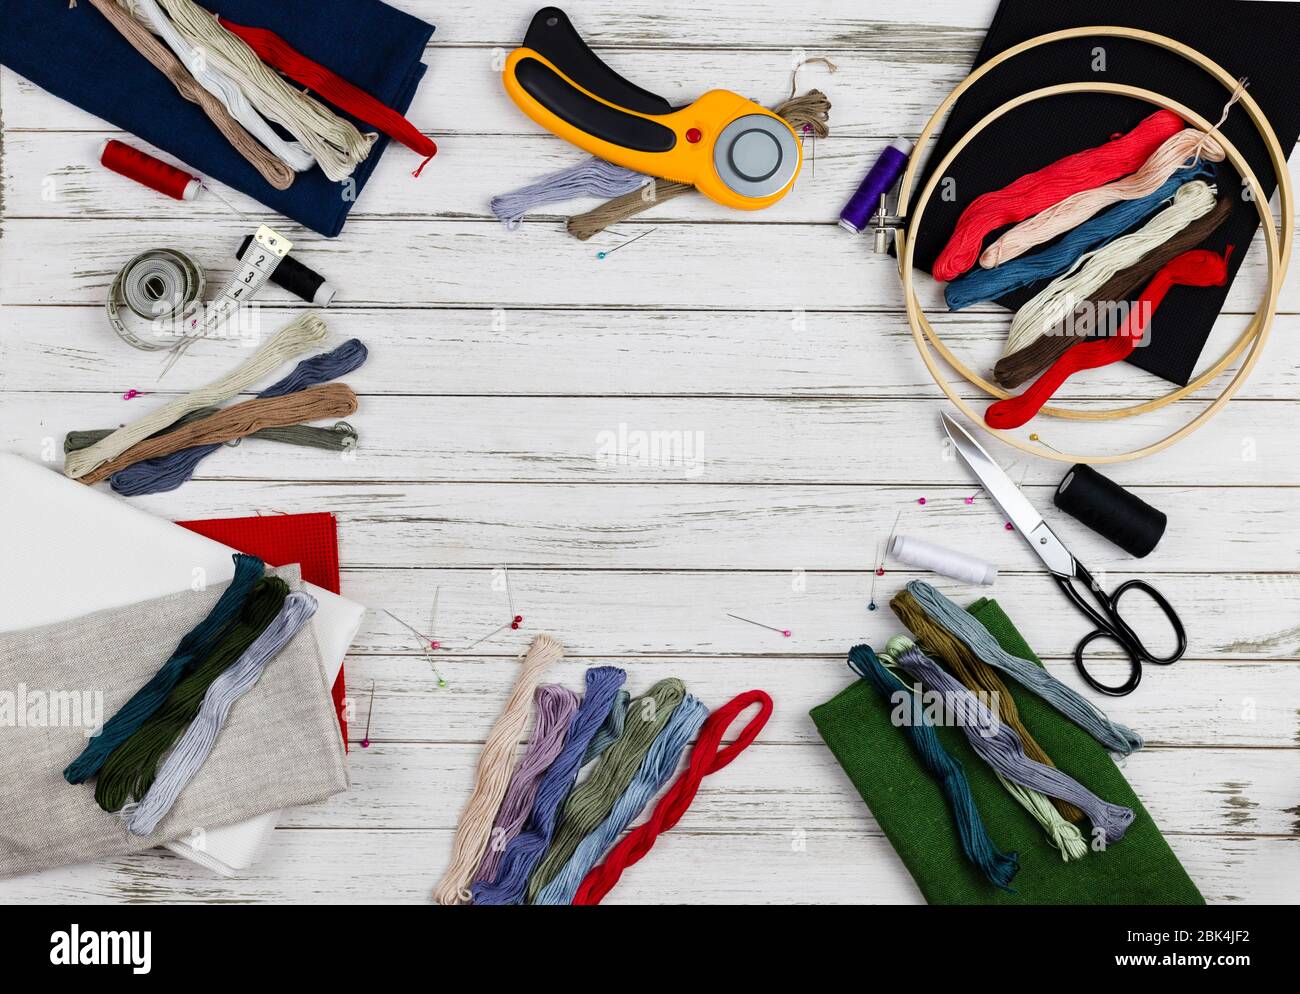 Small quilt, cutting mat and sewing and quilting accessories Stock Photo -  Alamy